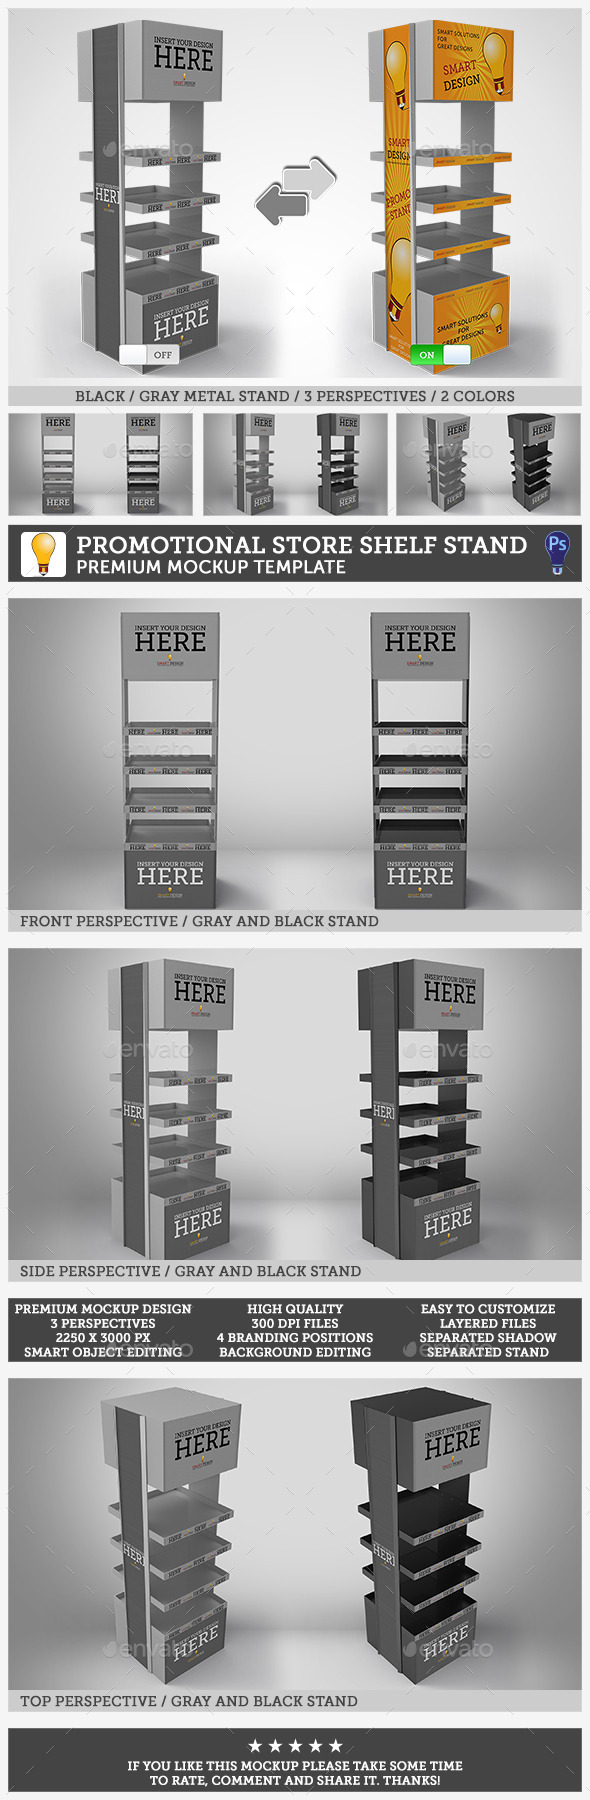 Download Stock Graphic - GraphicRiver Promotional Store Shelf Stand 11110807 » Dondrup.com